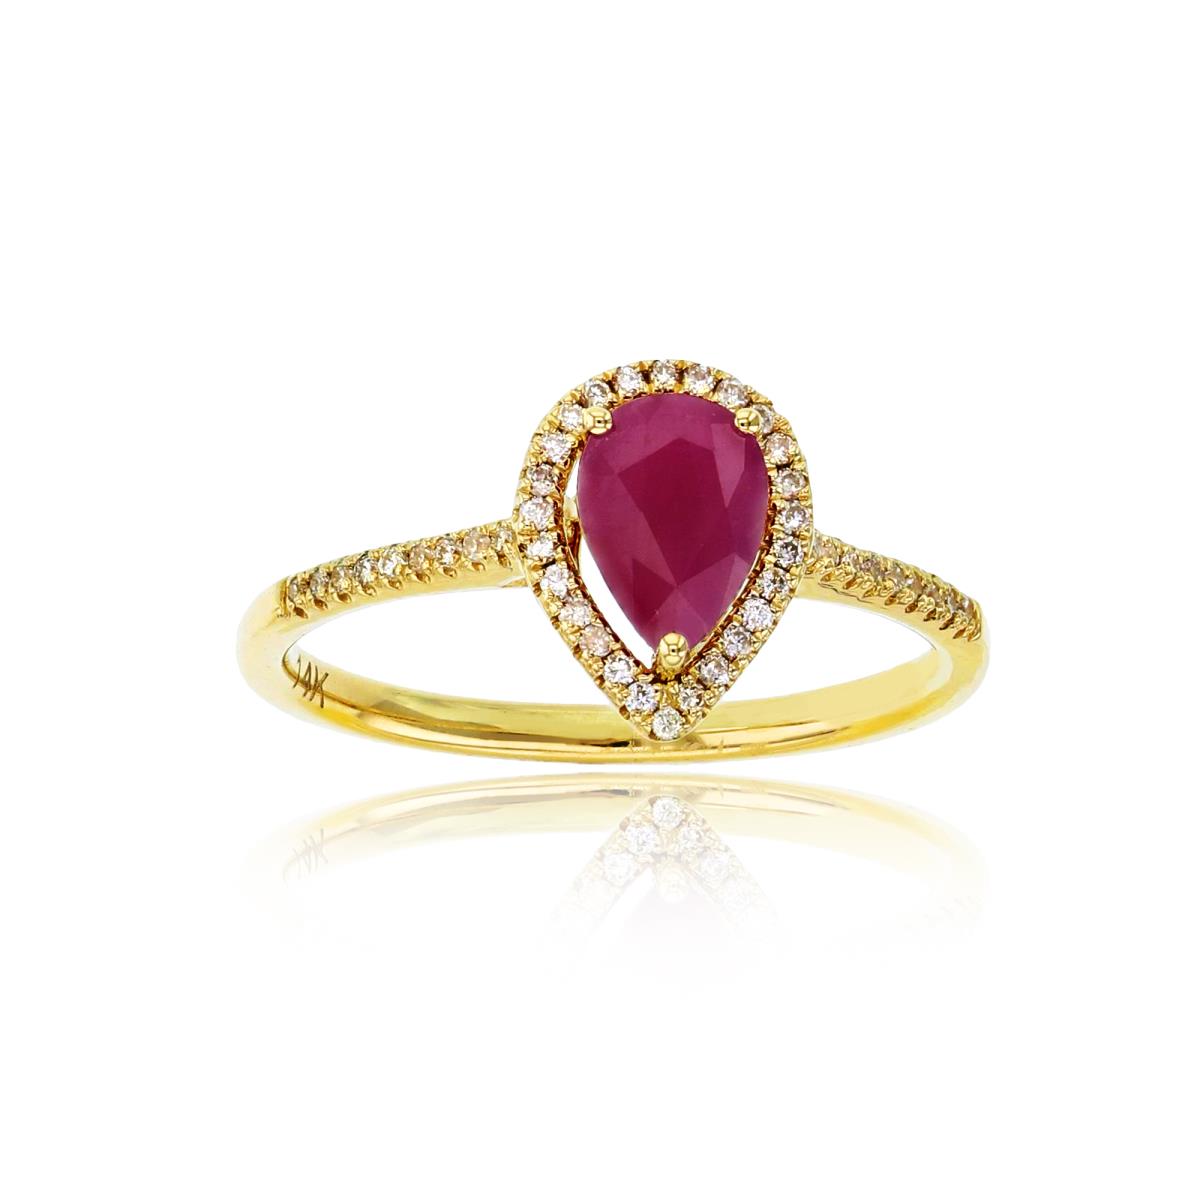 14K Yellow Gold 0.14cttw Rnd Diamonds & 7x5mm PS Ruby Halo Ring